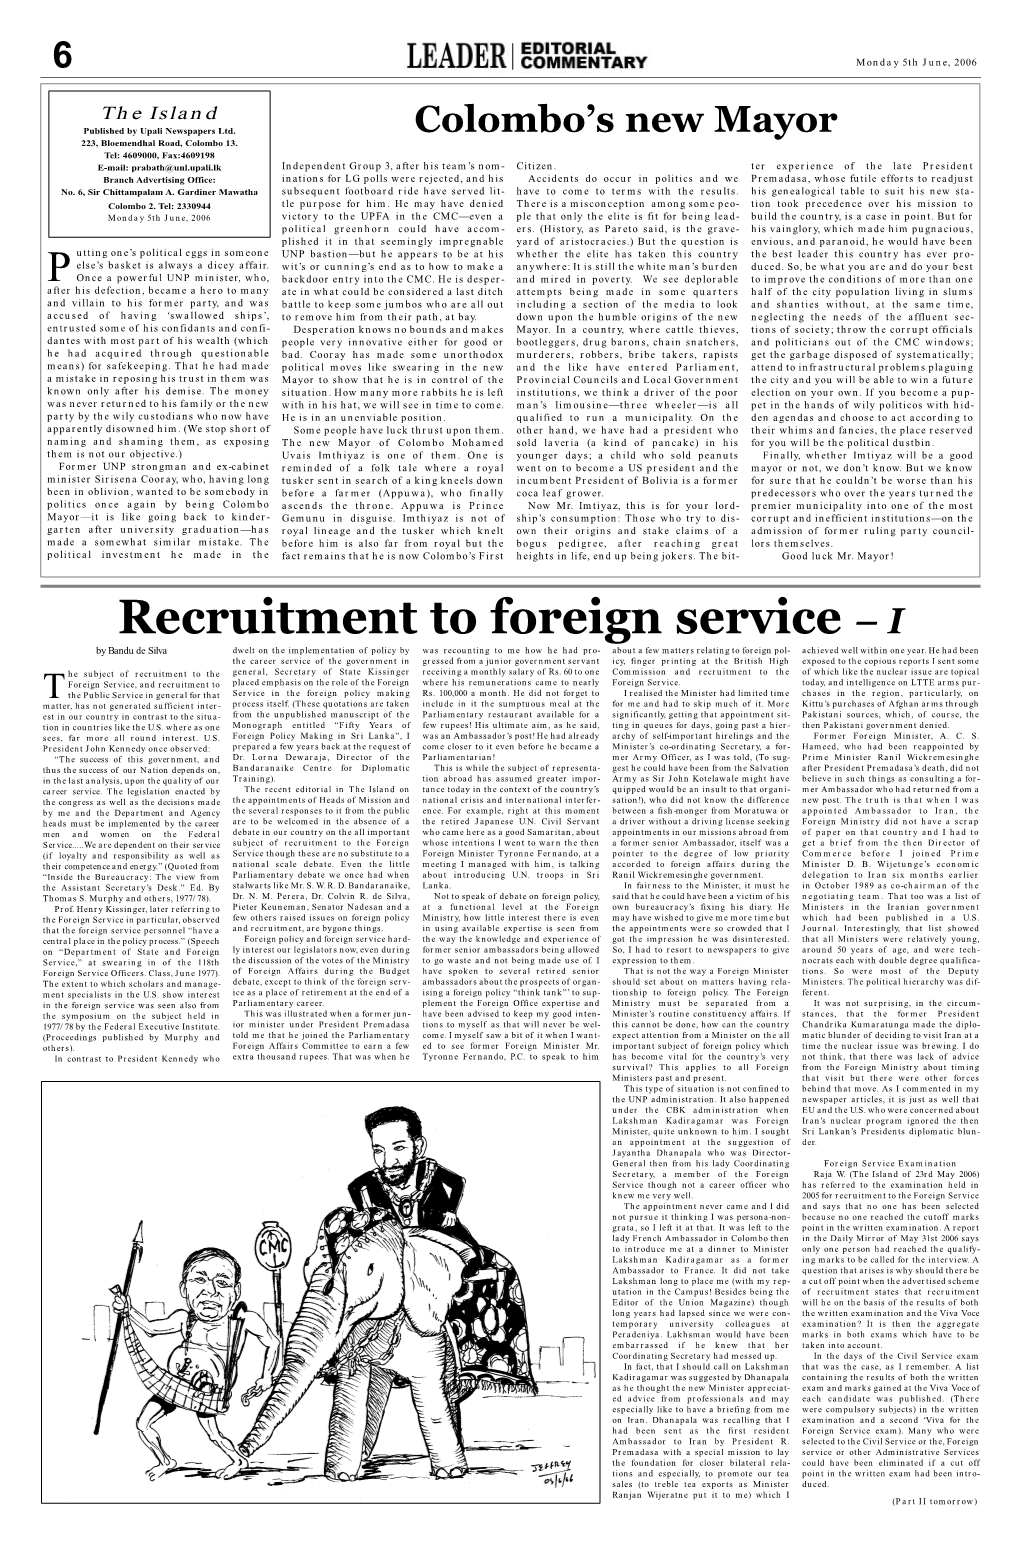 Recruitment to Foreign Service